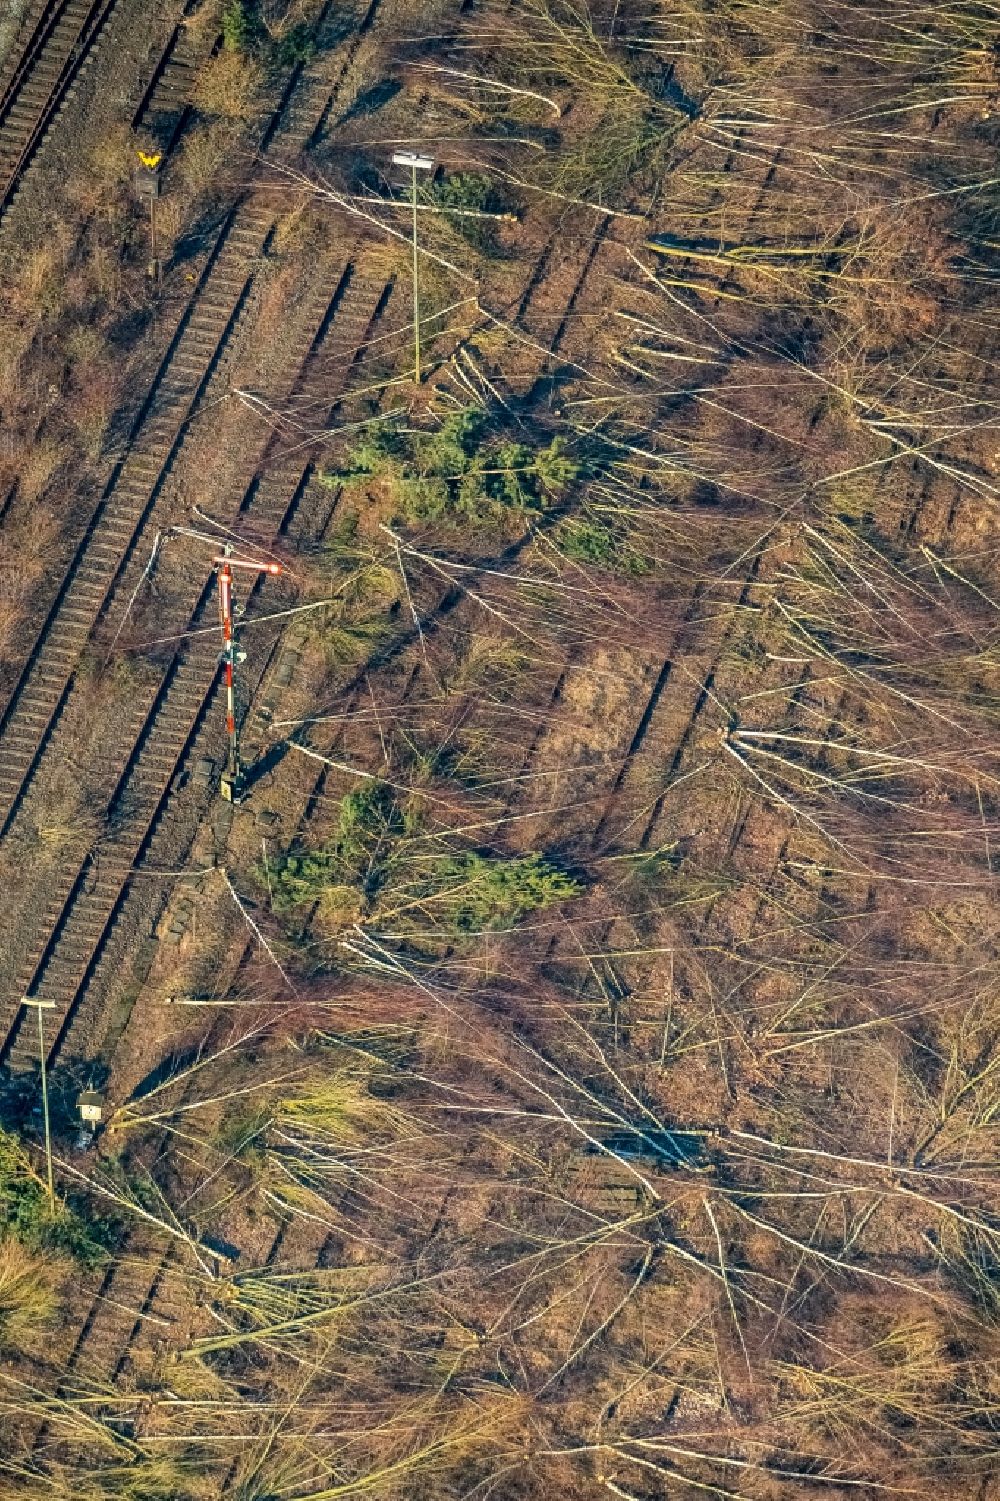 Aerial image Duisburg - Development area of the decommissioned and unused land and real estate on the former marshalling yard and railway station of Deutsche Bahn in the district Dellviertel in Duisburg in the state North Rhine-Westphalia